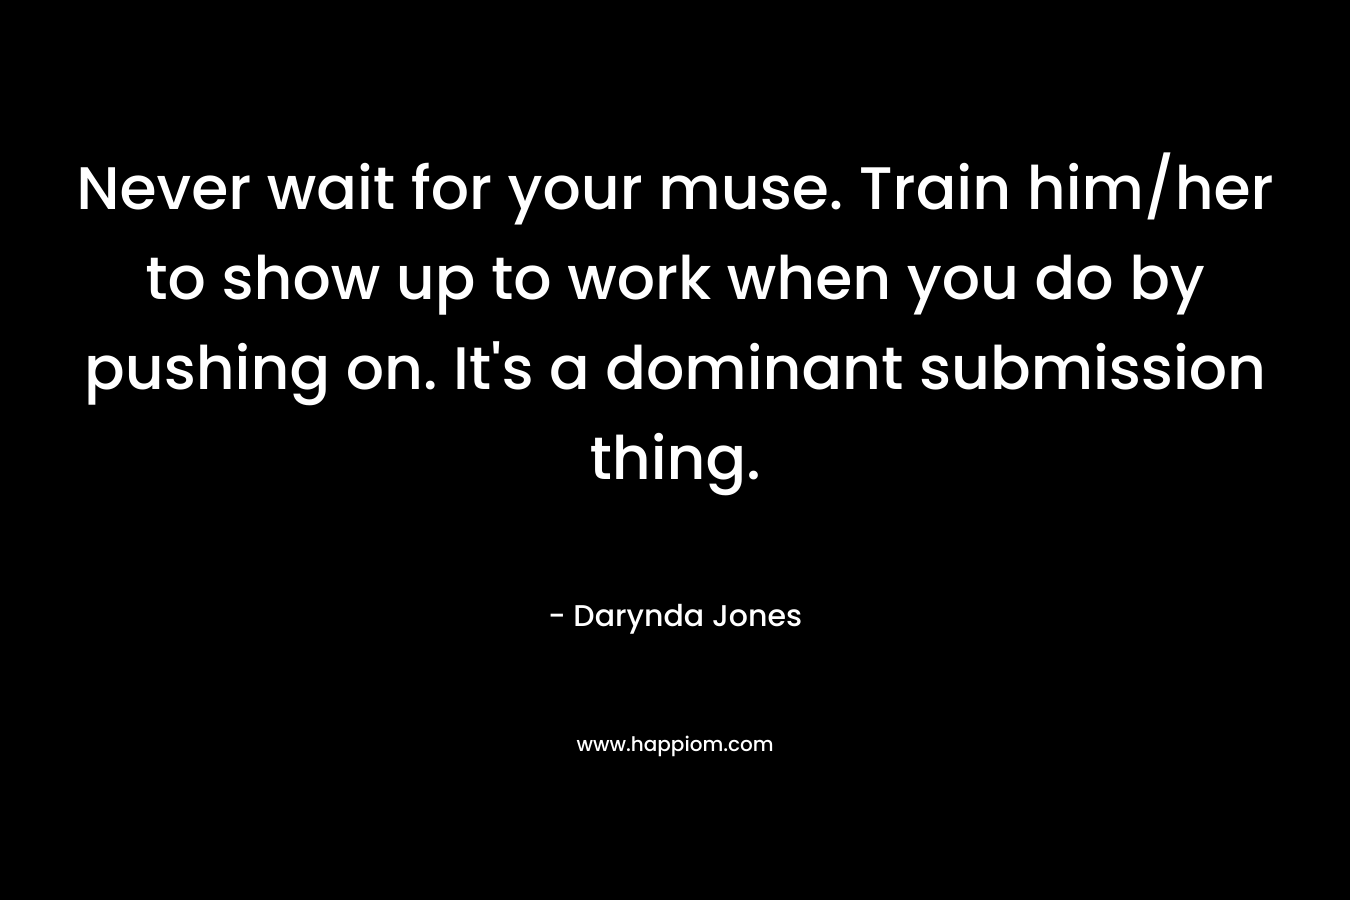 Never wait for your muse. Train him/her to show up to work when you do by pushing on. It’s a dominant submission thing. – Darynda Jones